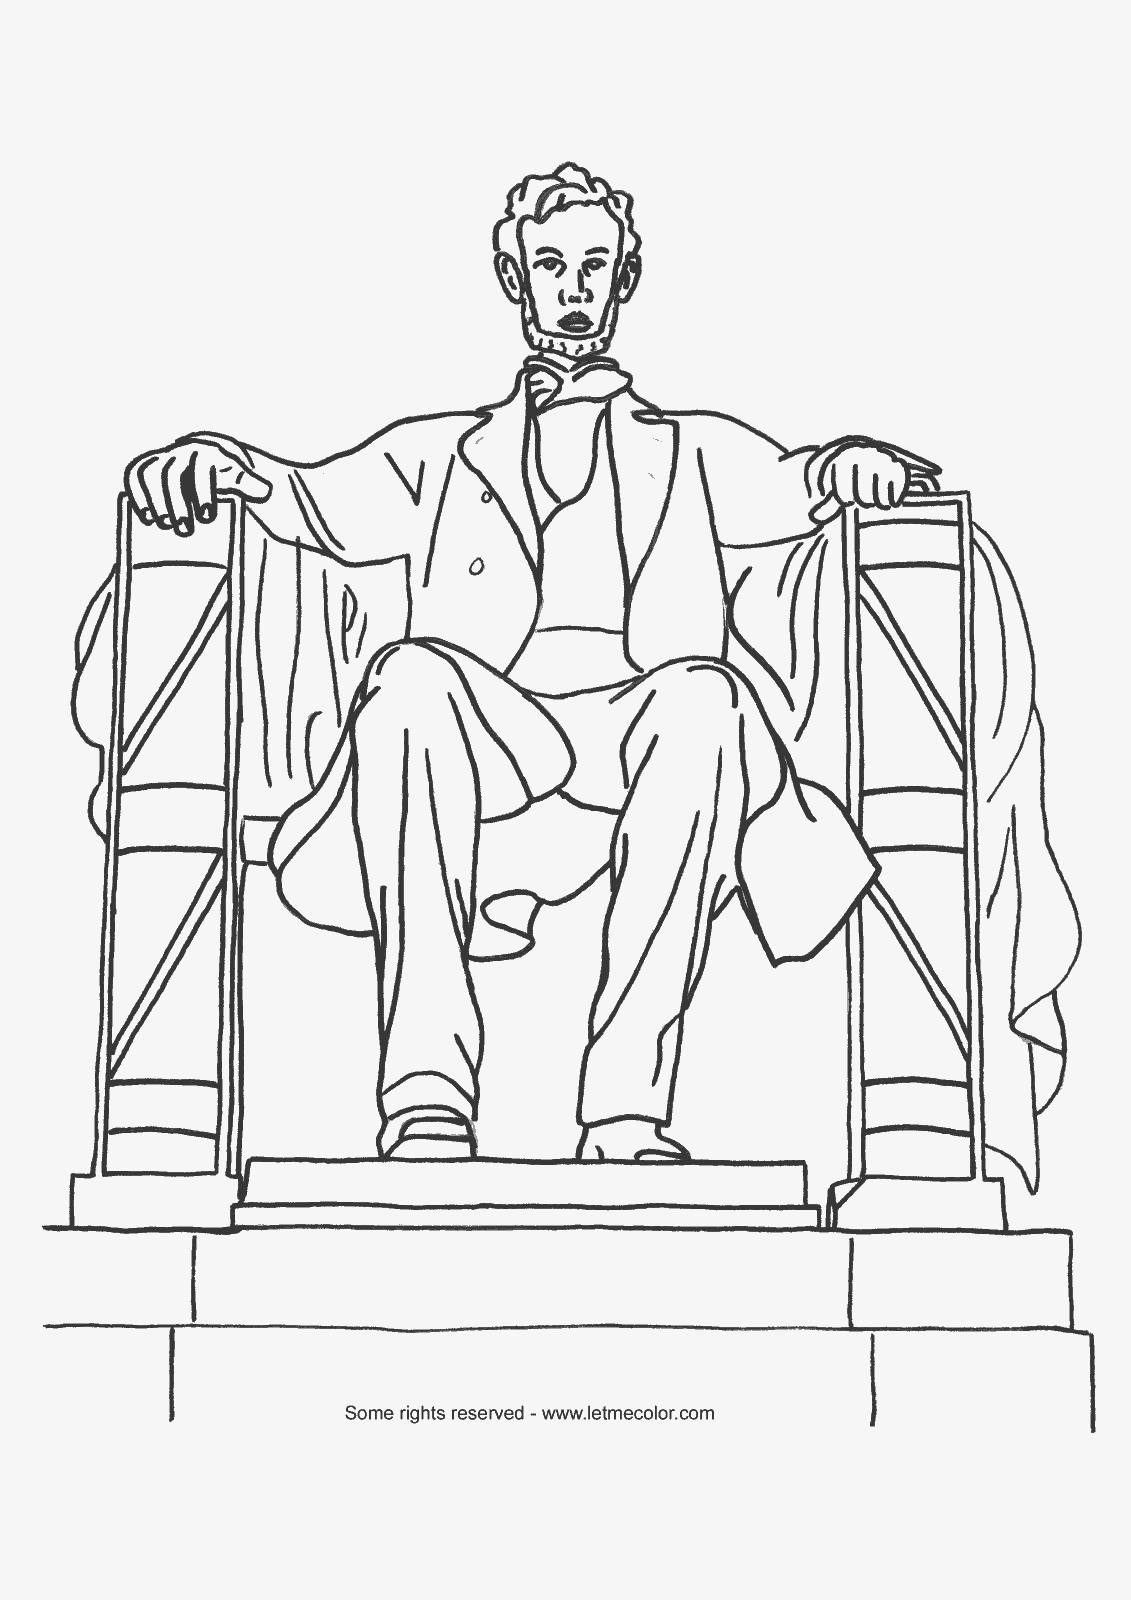 Washington Monument Coloring Page Coloring Pages